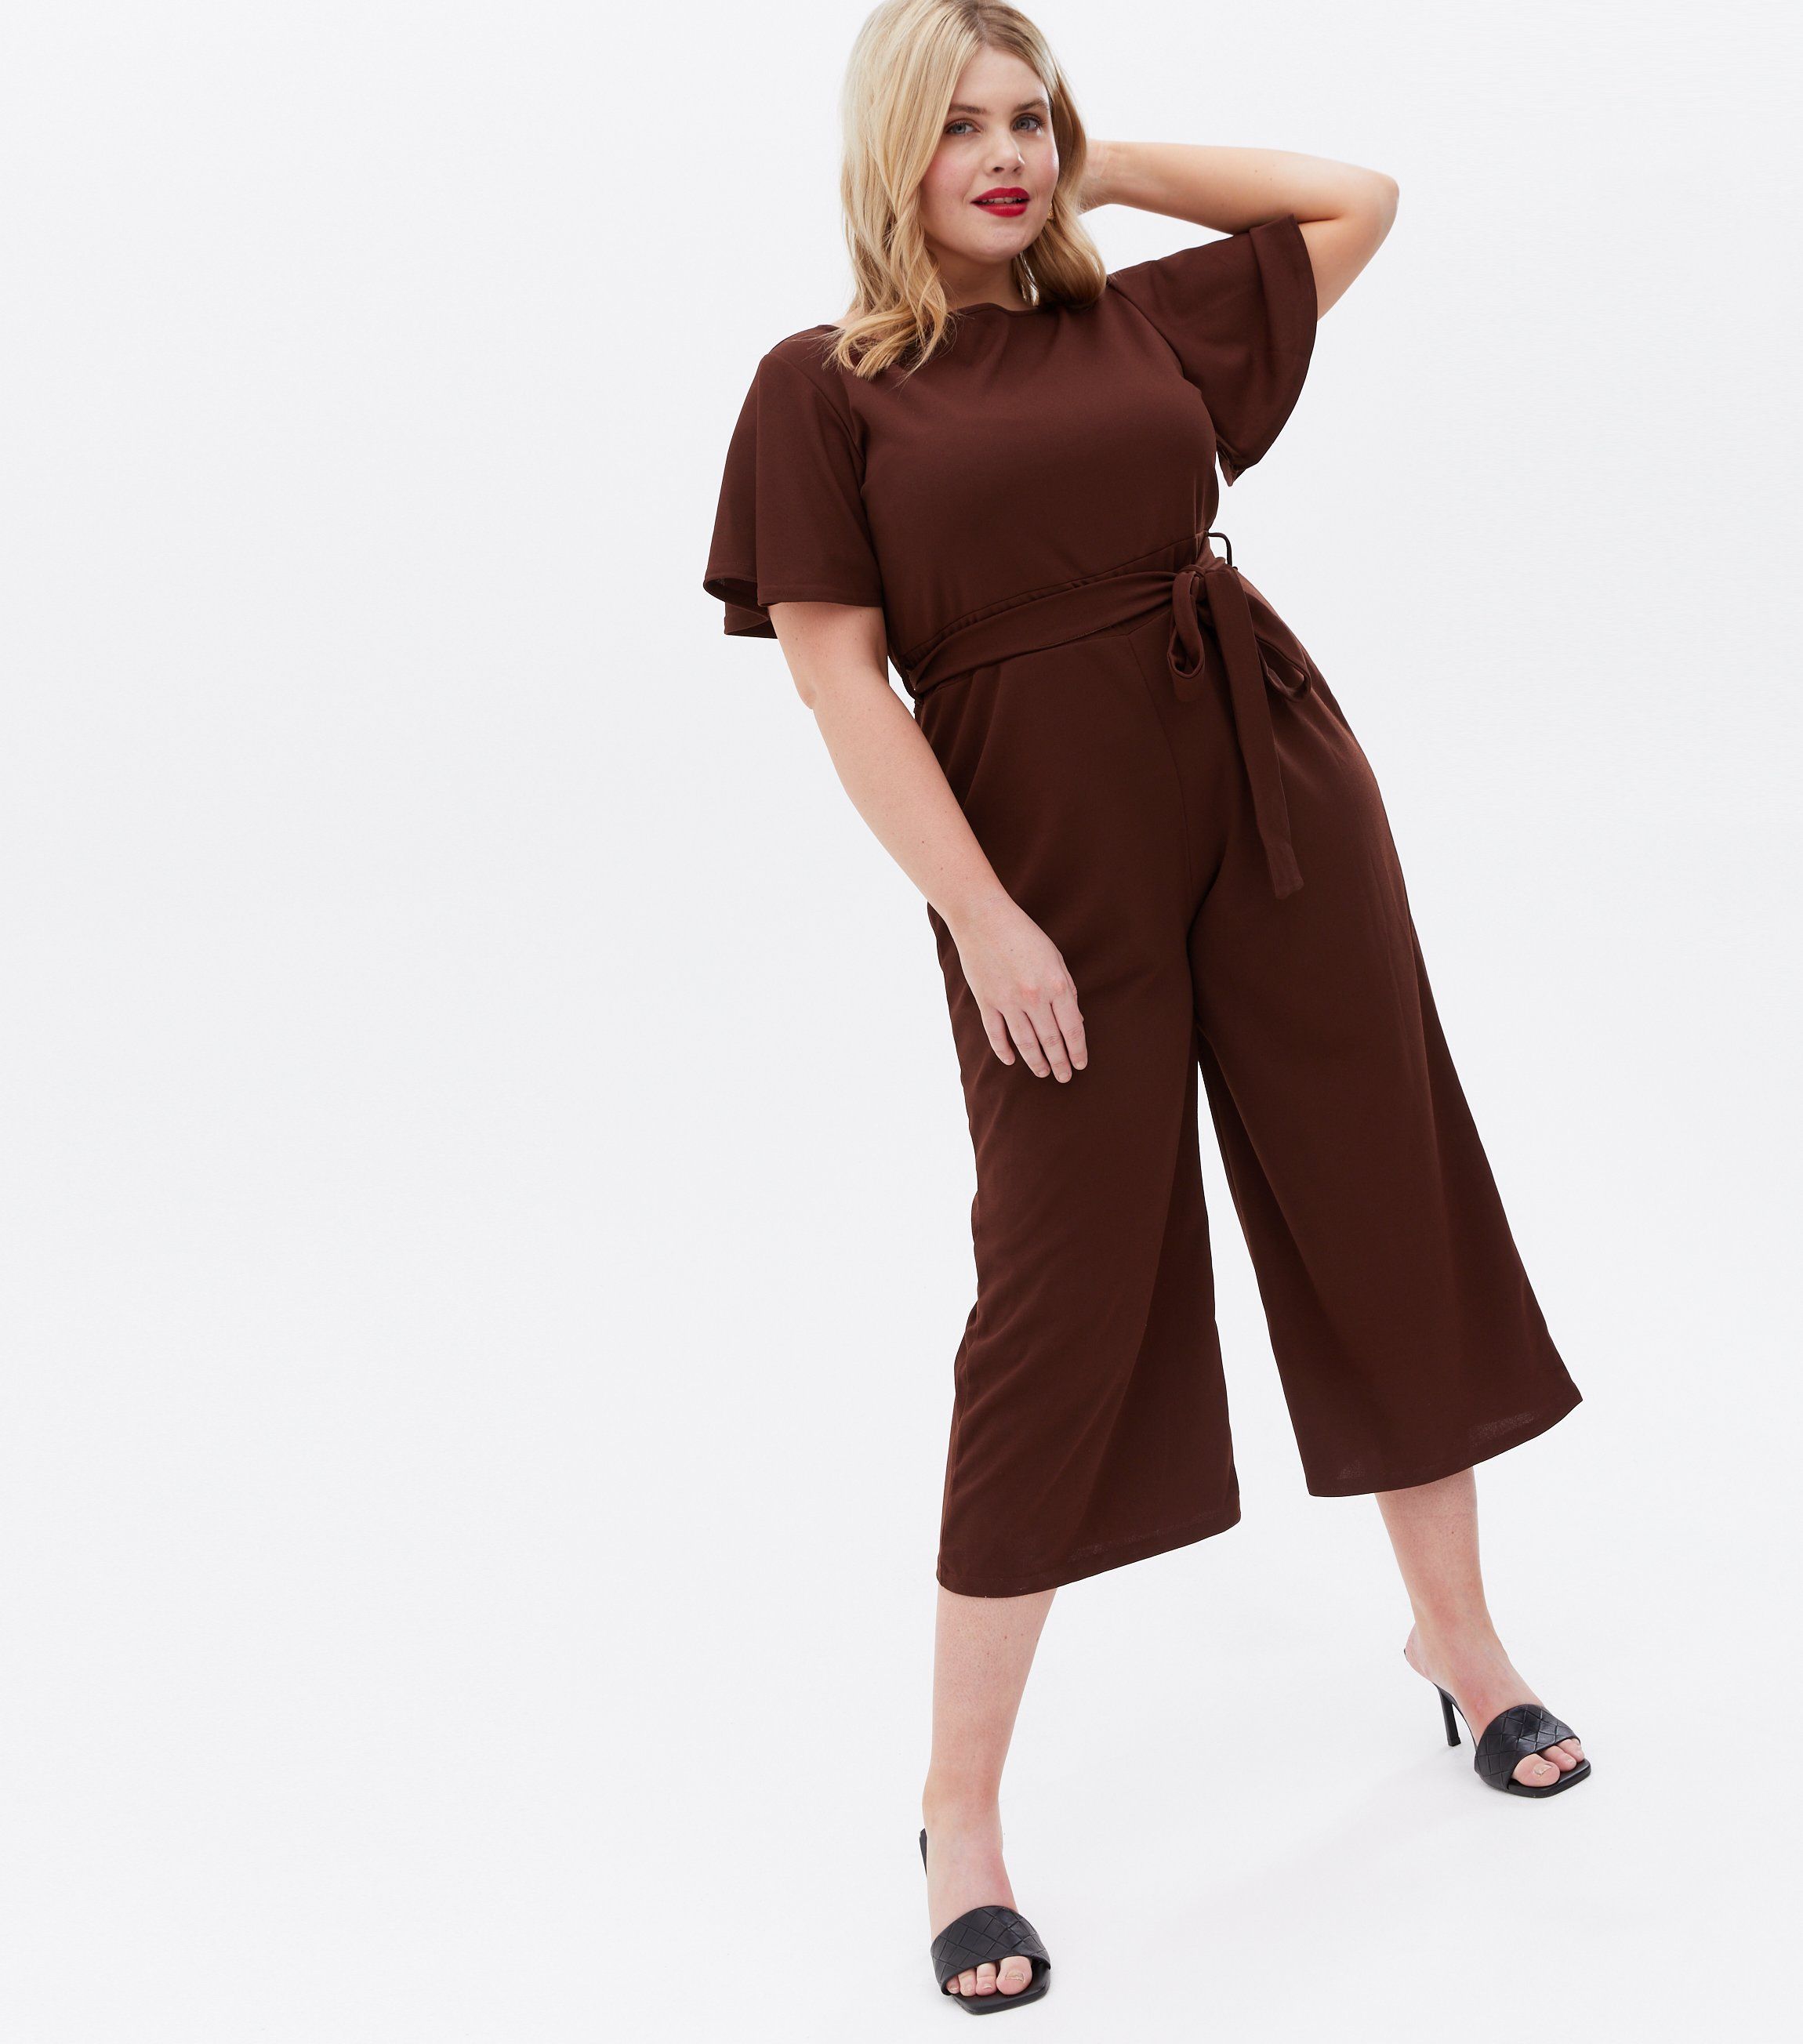 Zina jumpsuit  Brown by woenilga  Jumpsuits amp Overalls  Afrikrea